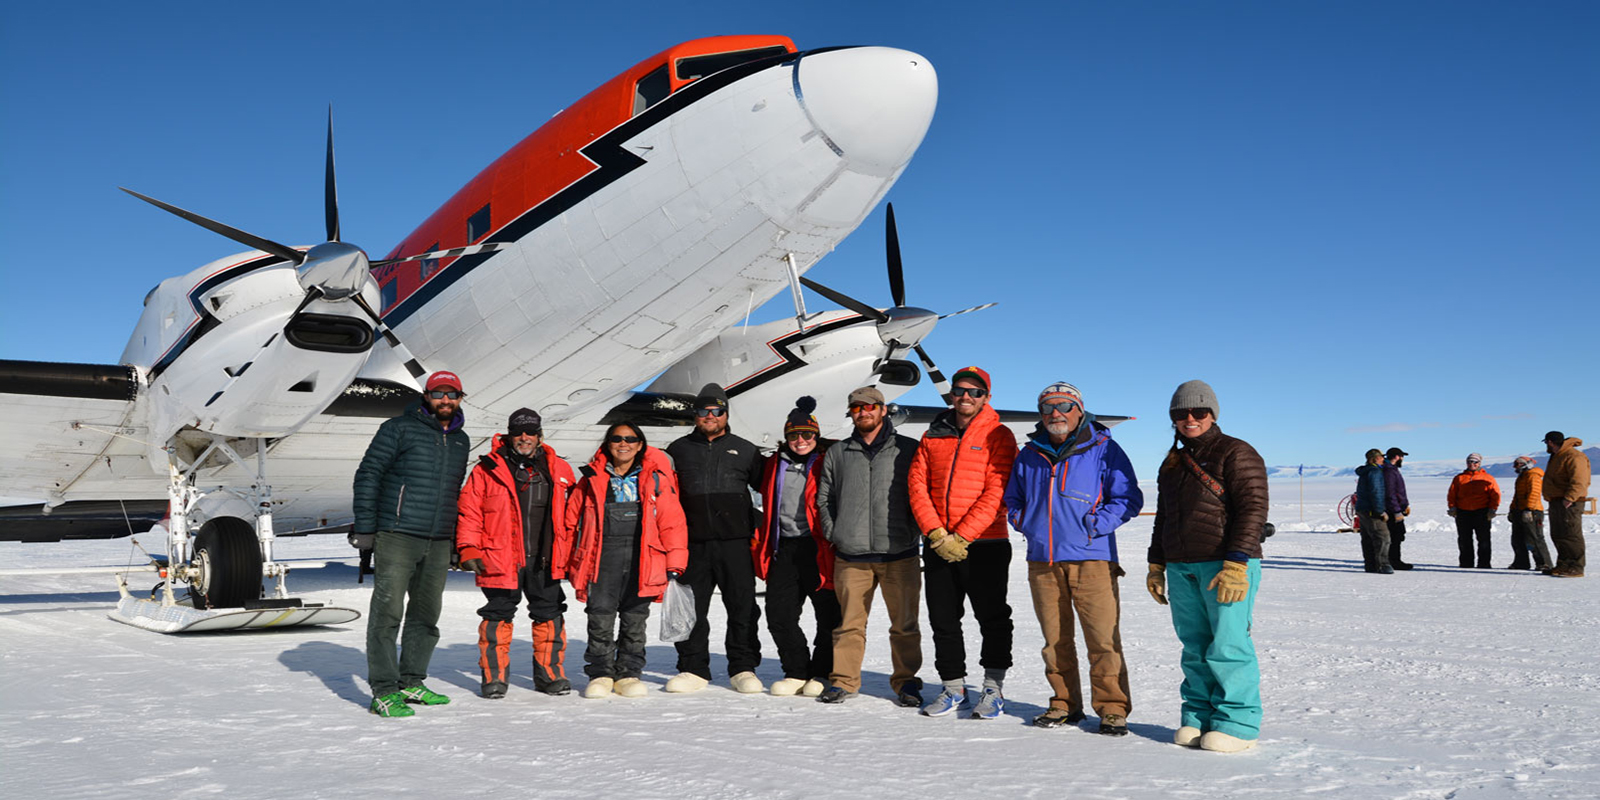 group of scientists stand in front of the airplane that dropped them off on the snow-covered runway in Antarctica